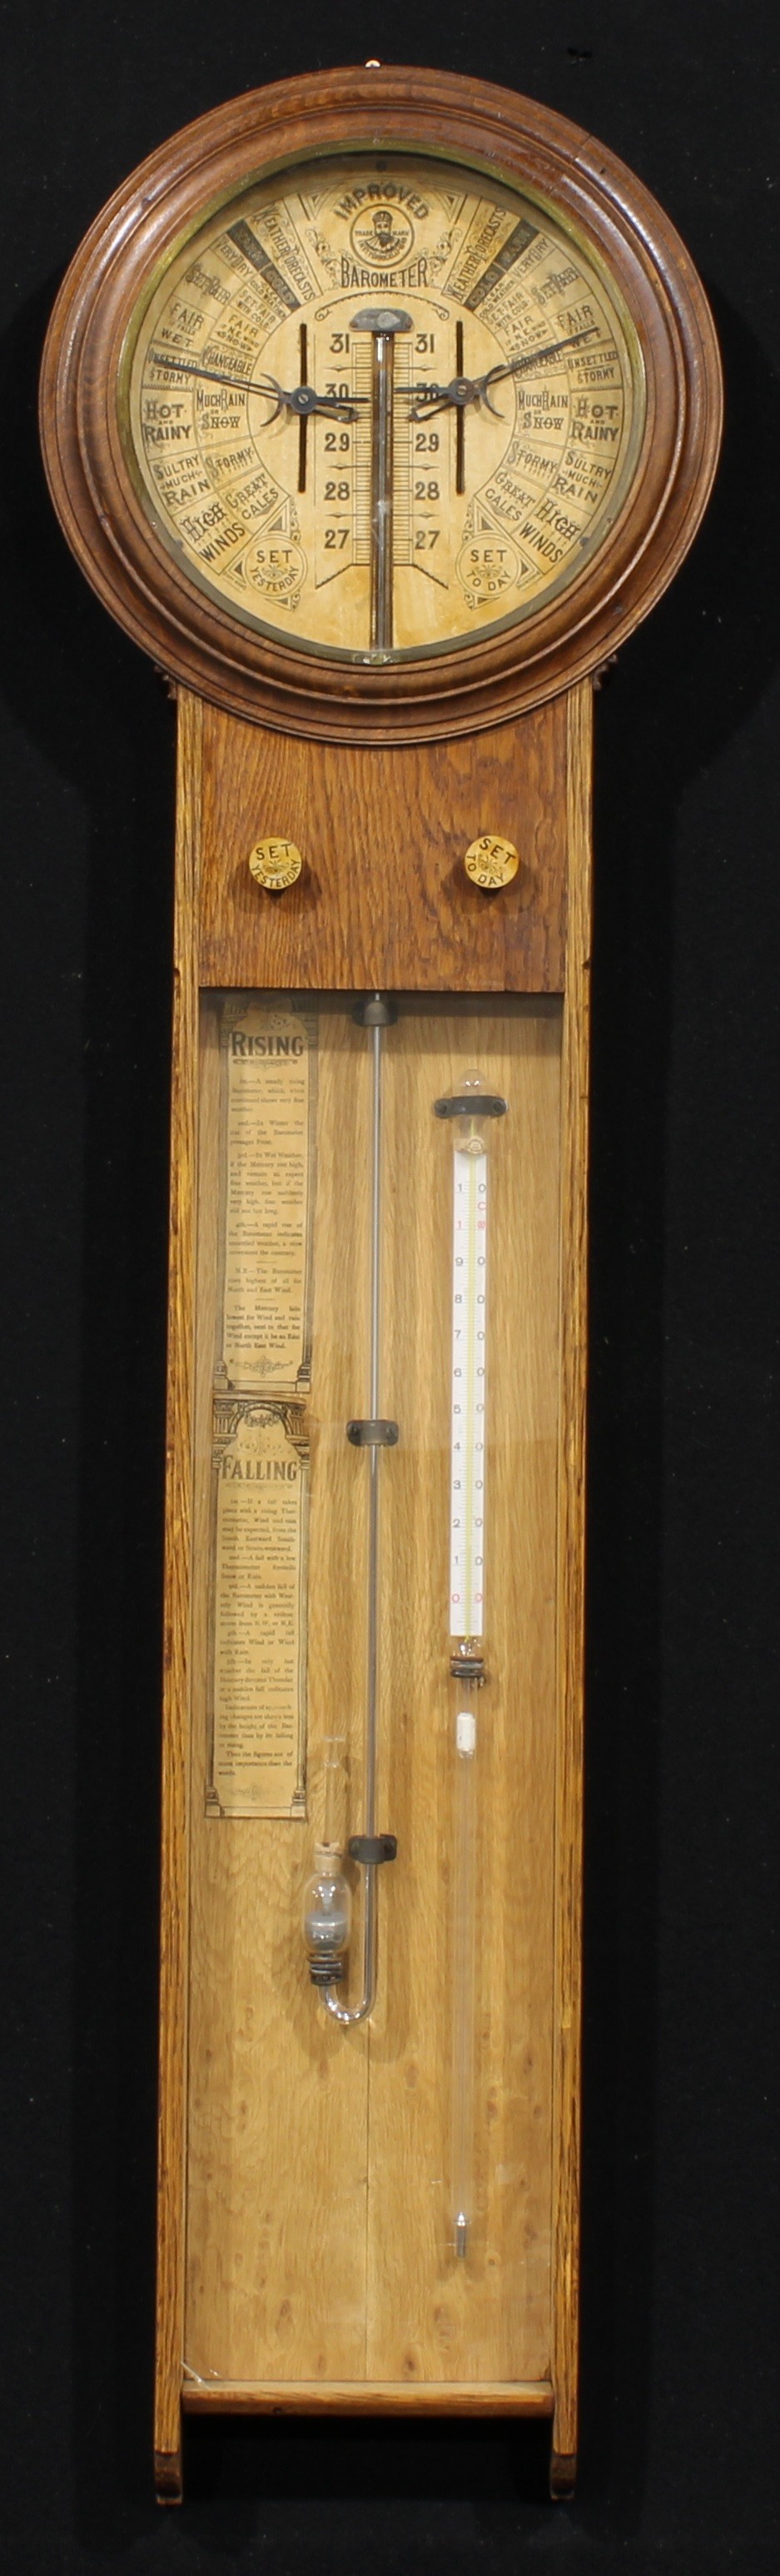 An early 20th century oak Royal Polytechnic type barometer, in the manner of Admiral Fitzroy, 25cm